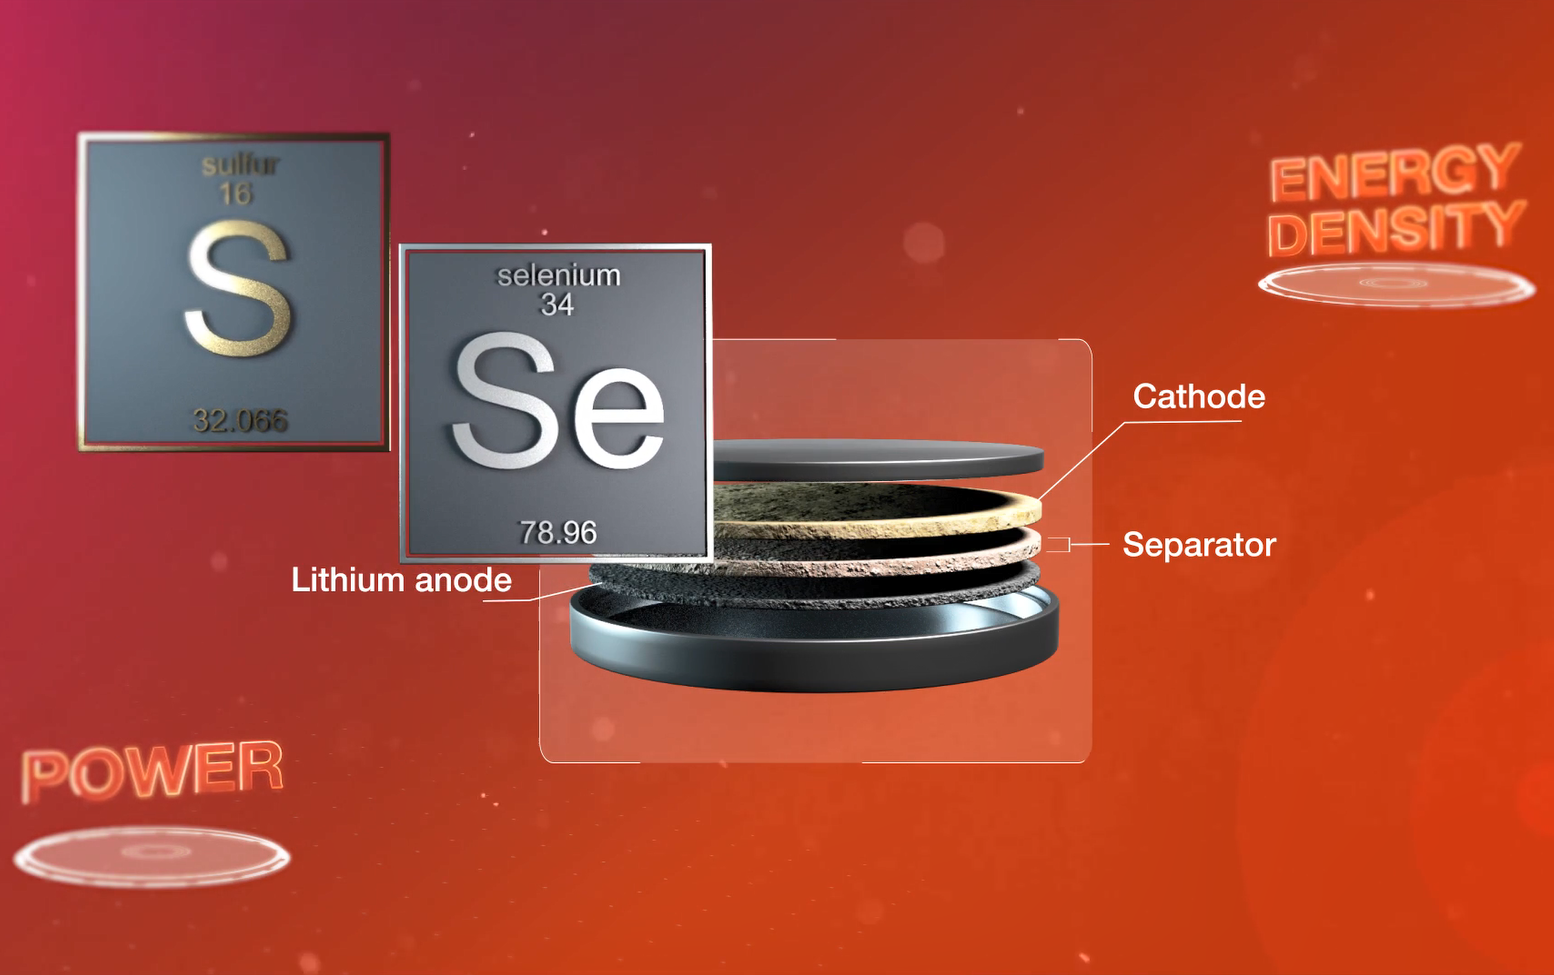 Graphic illustration showing the battery lithium anode, cathode and separator.